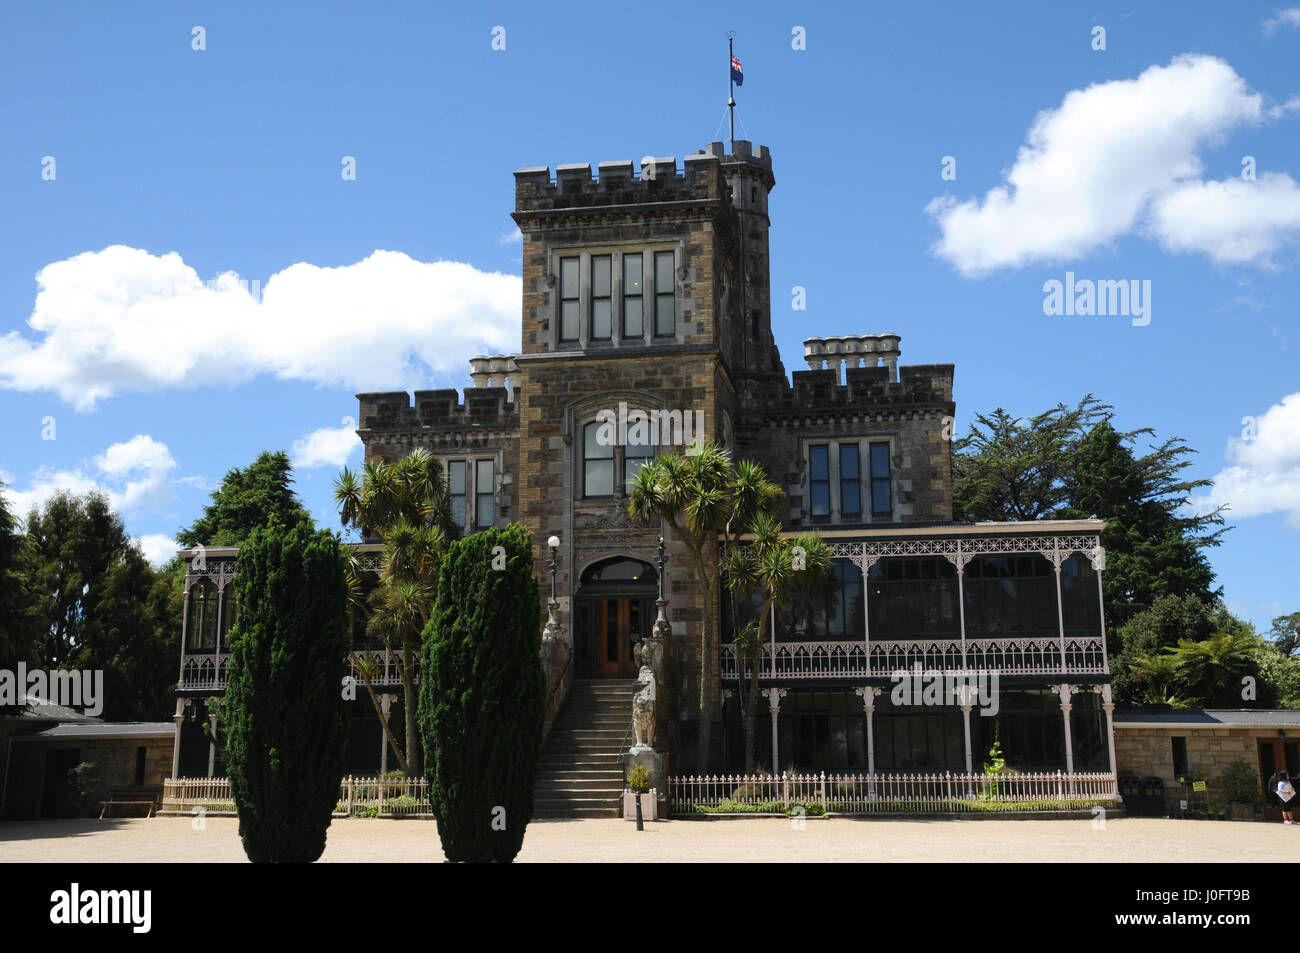 Larnach Castle, nr. Dunedin on New Zealand's South Island claims to be the country's only castle. It was built 1871 for William Larnach. Stock Photo